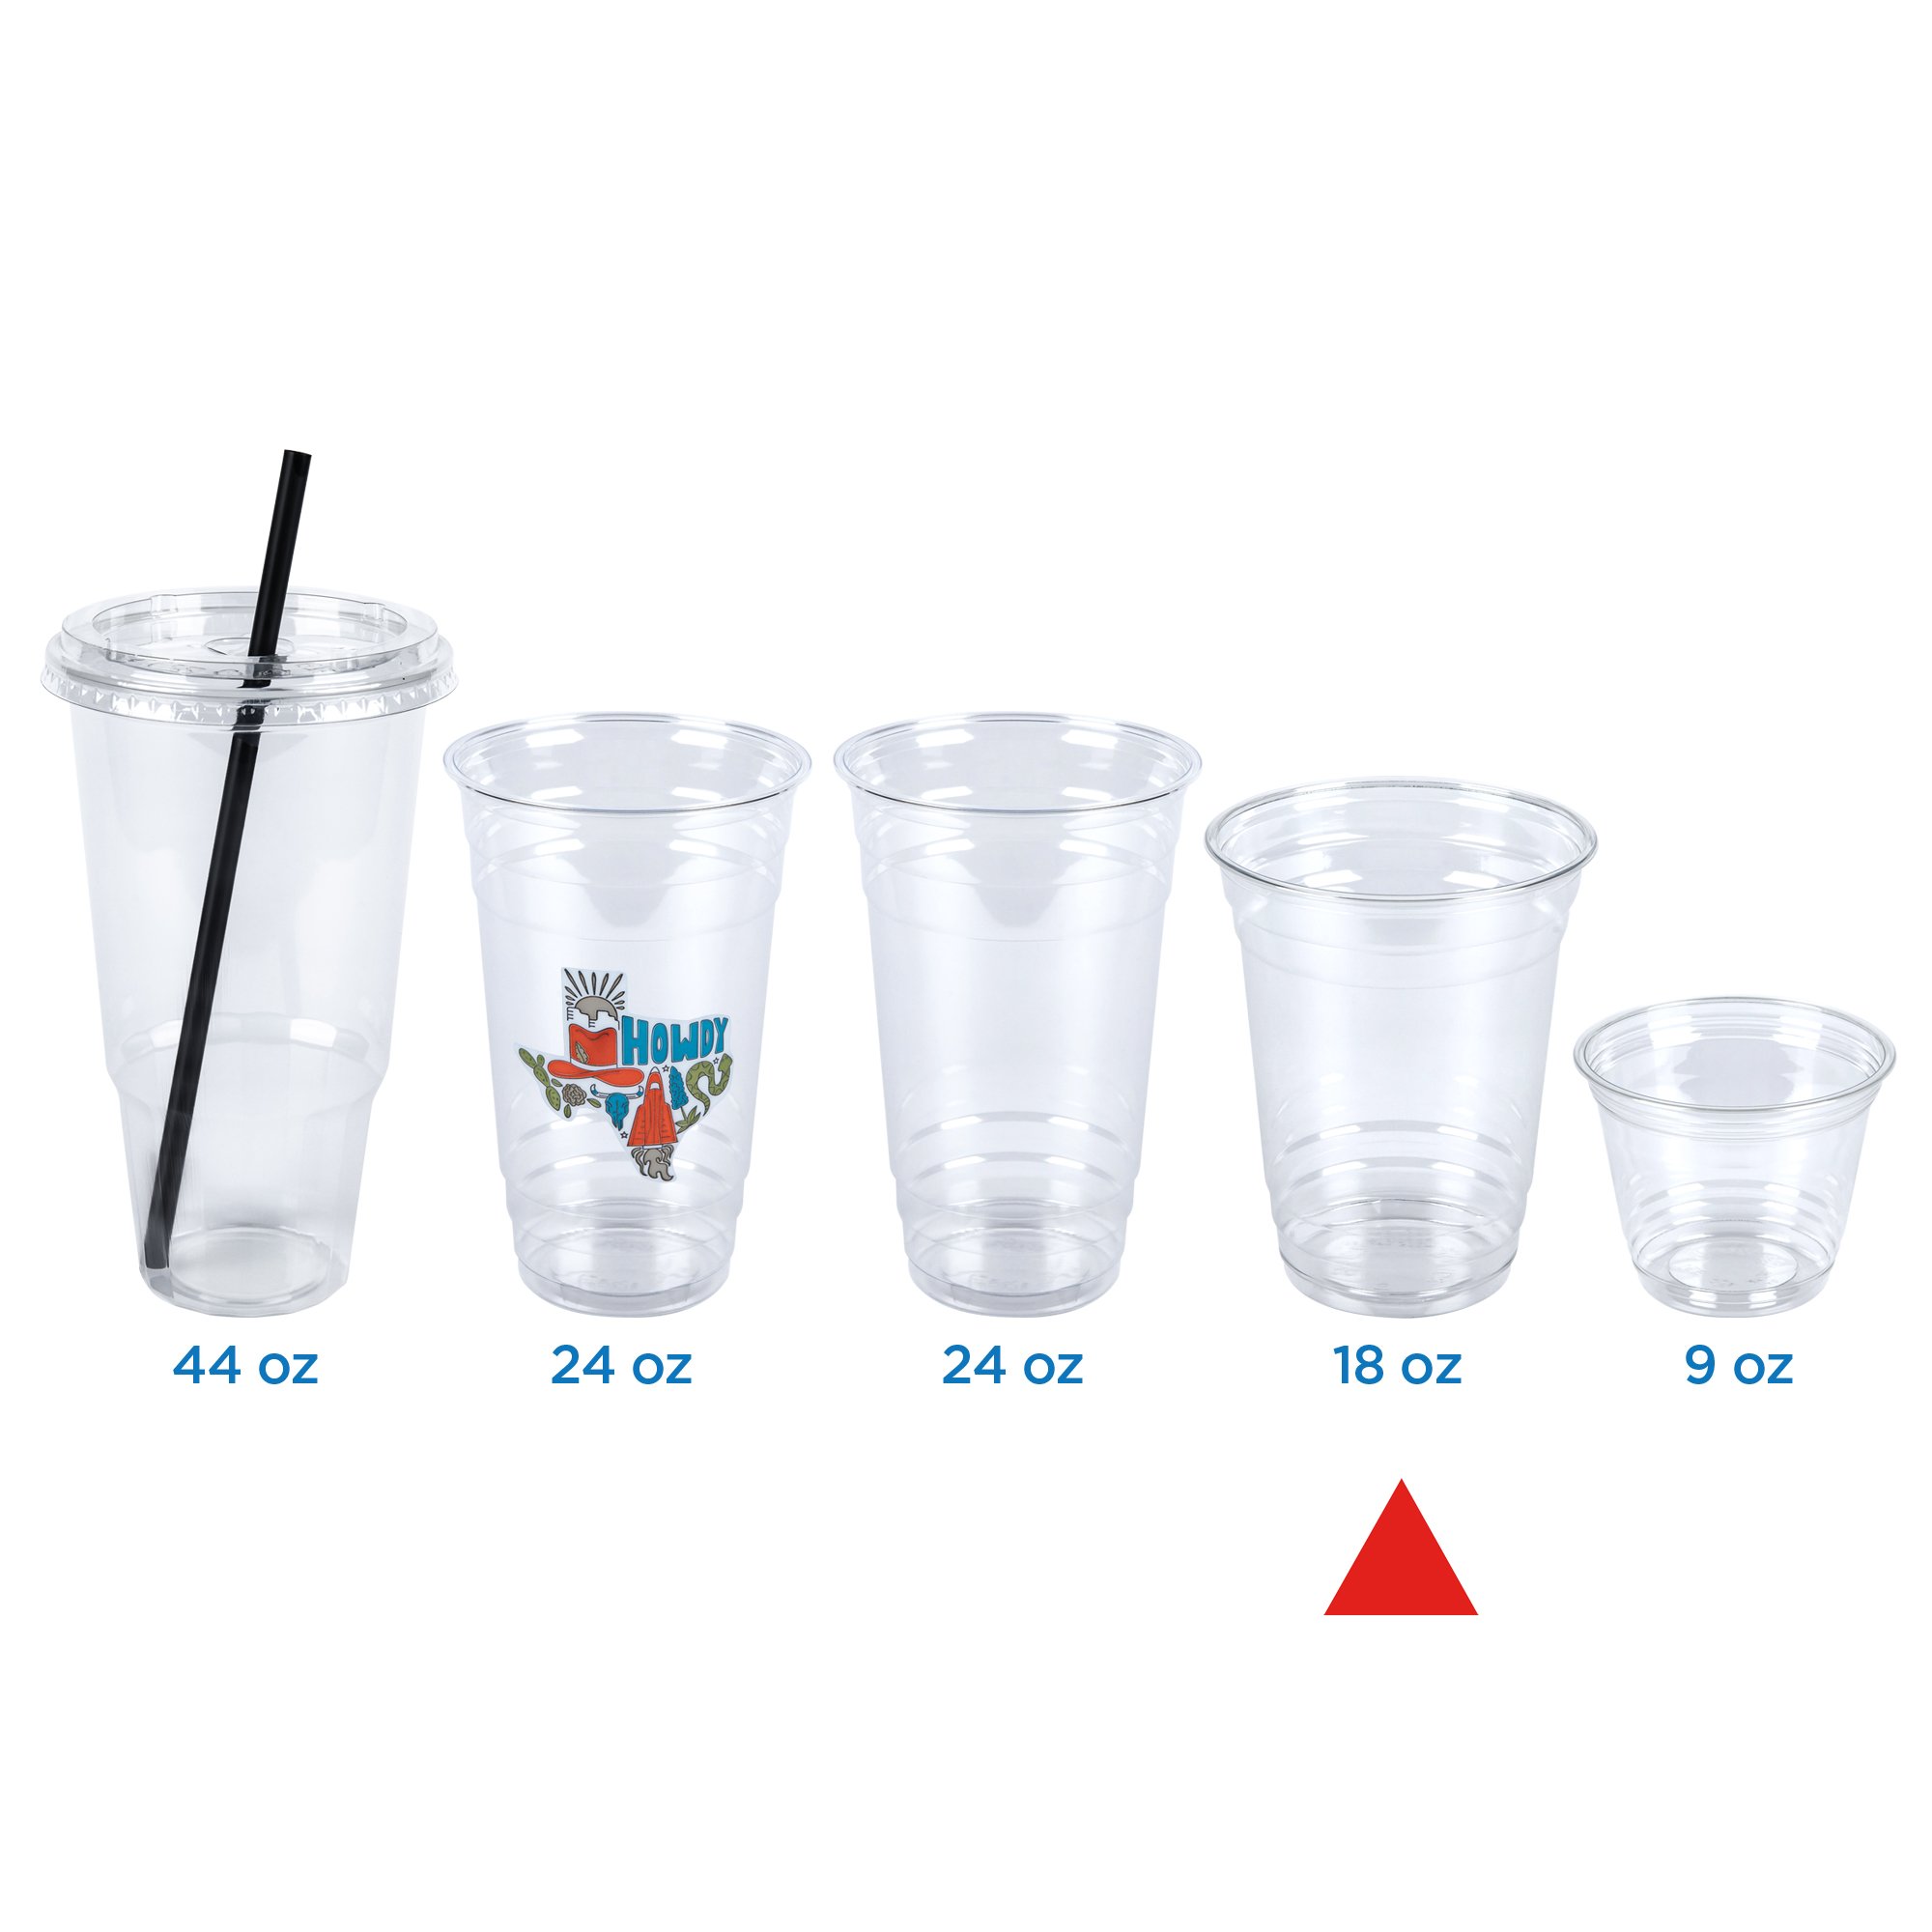 5 Oz. Clear Cup With Lid - 12 Ct.